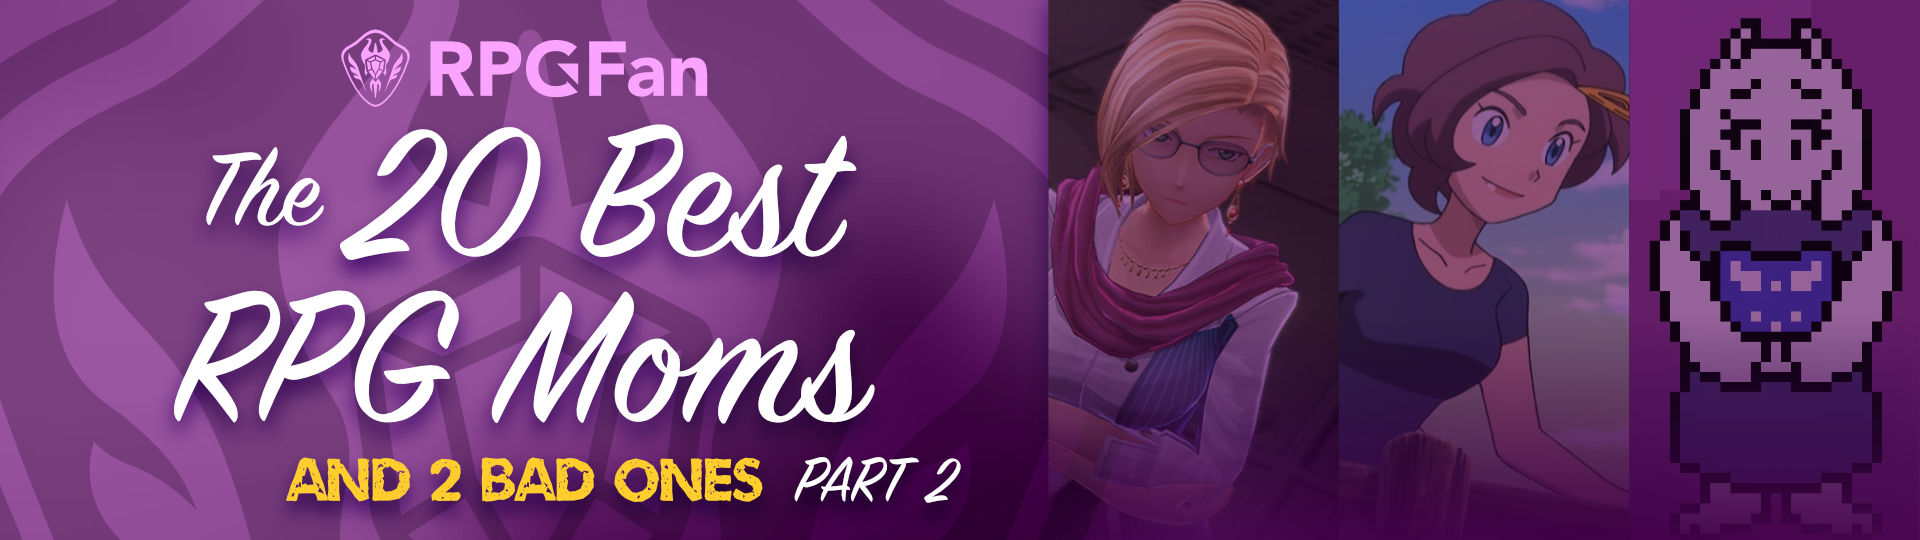 The 20 Best RPG Moms and 2 Bad Ones Featured